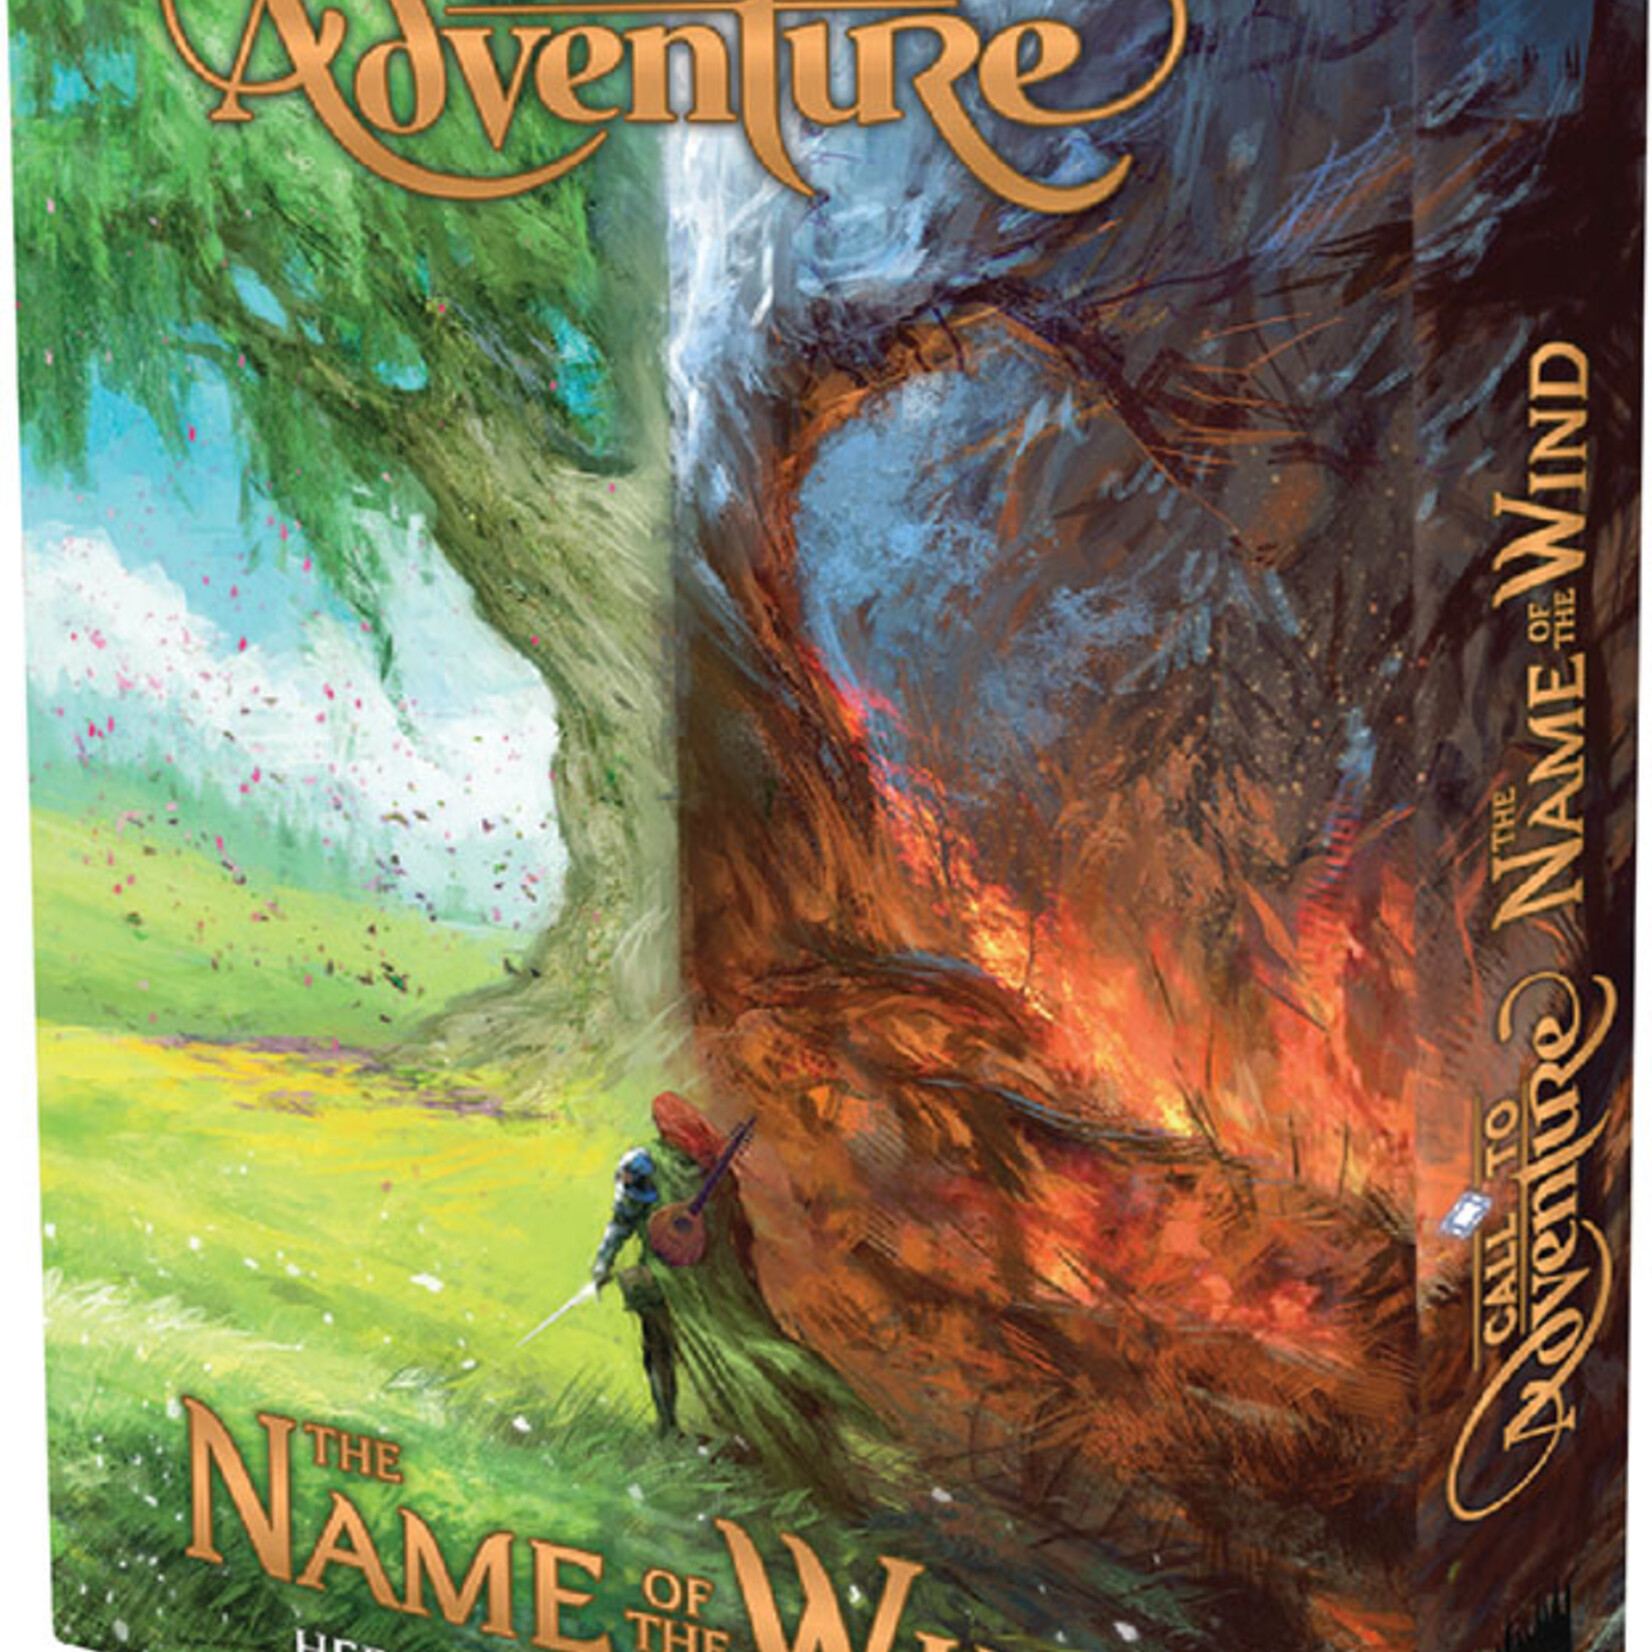 Brotherwise Games Call to Adventure: The Name of the Wind Expansion